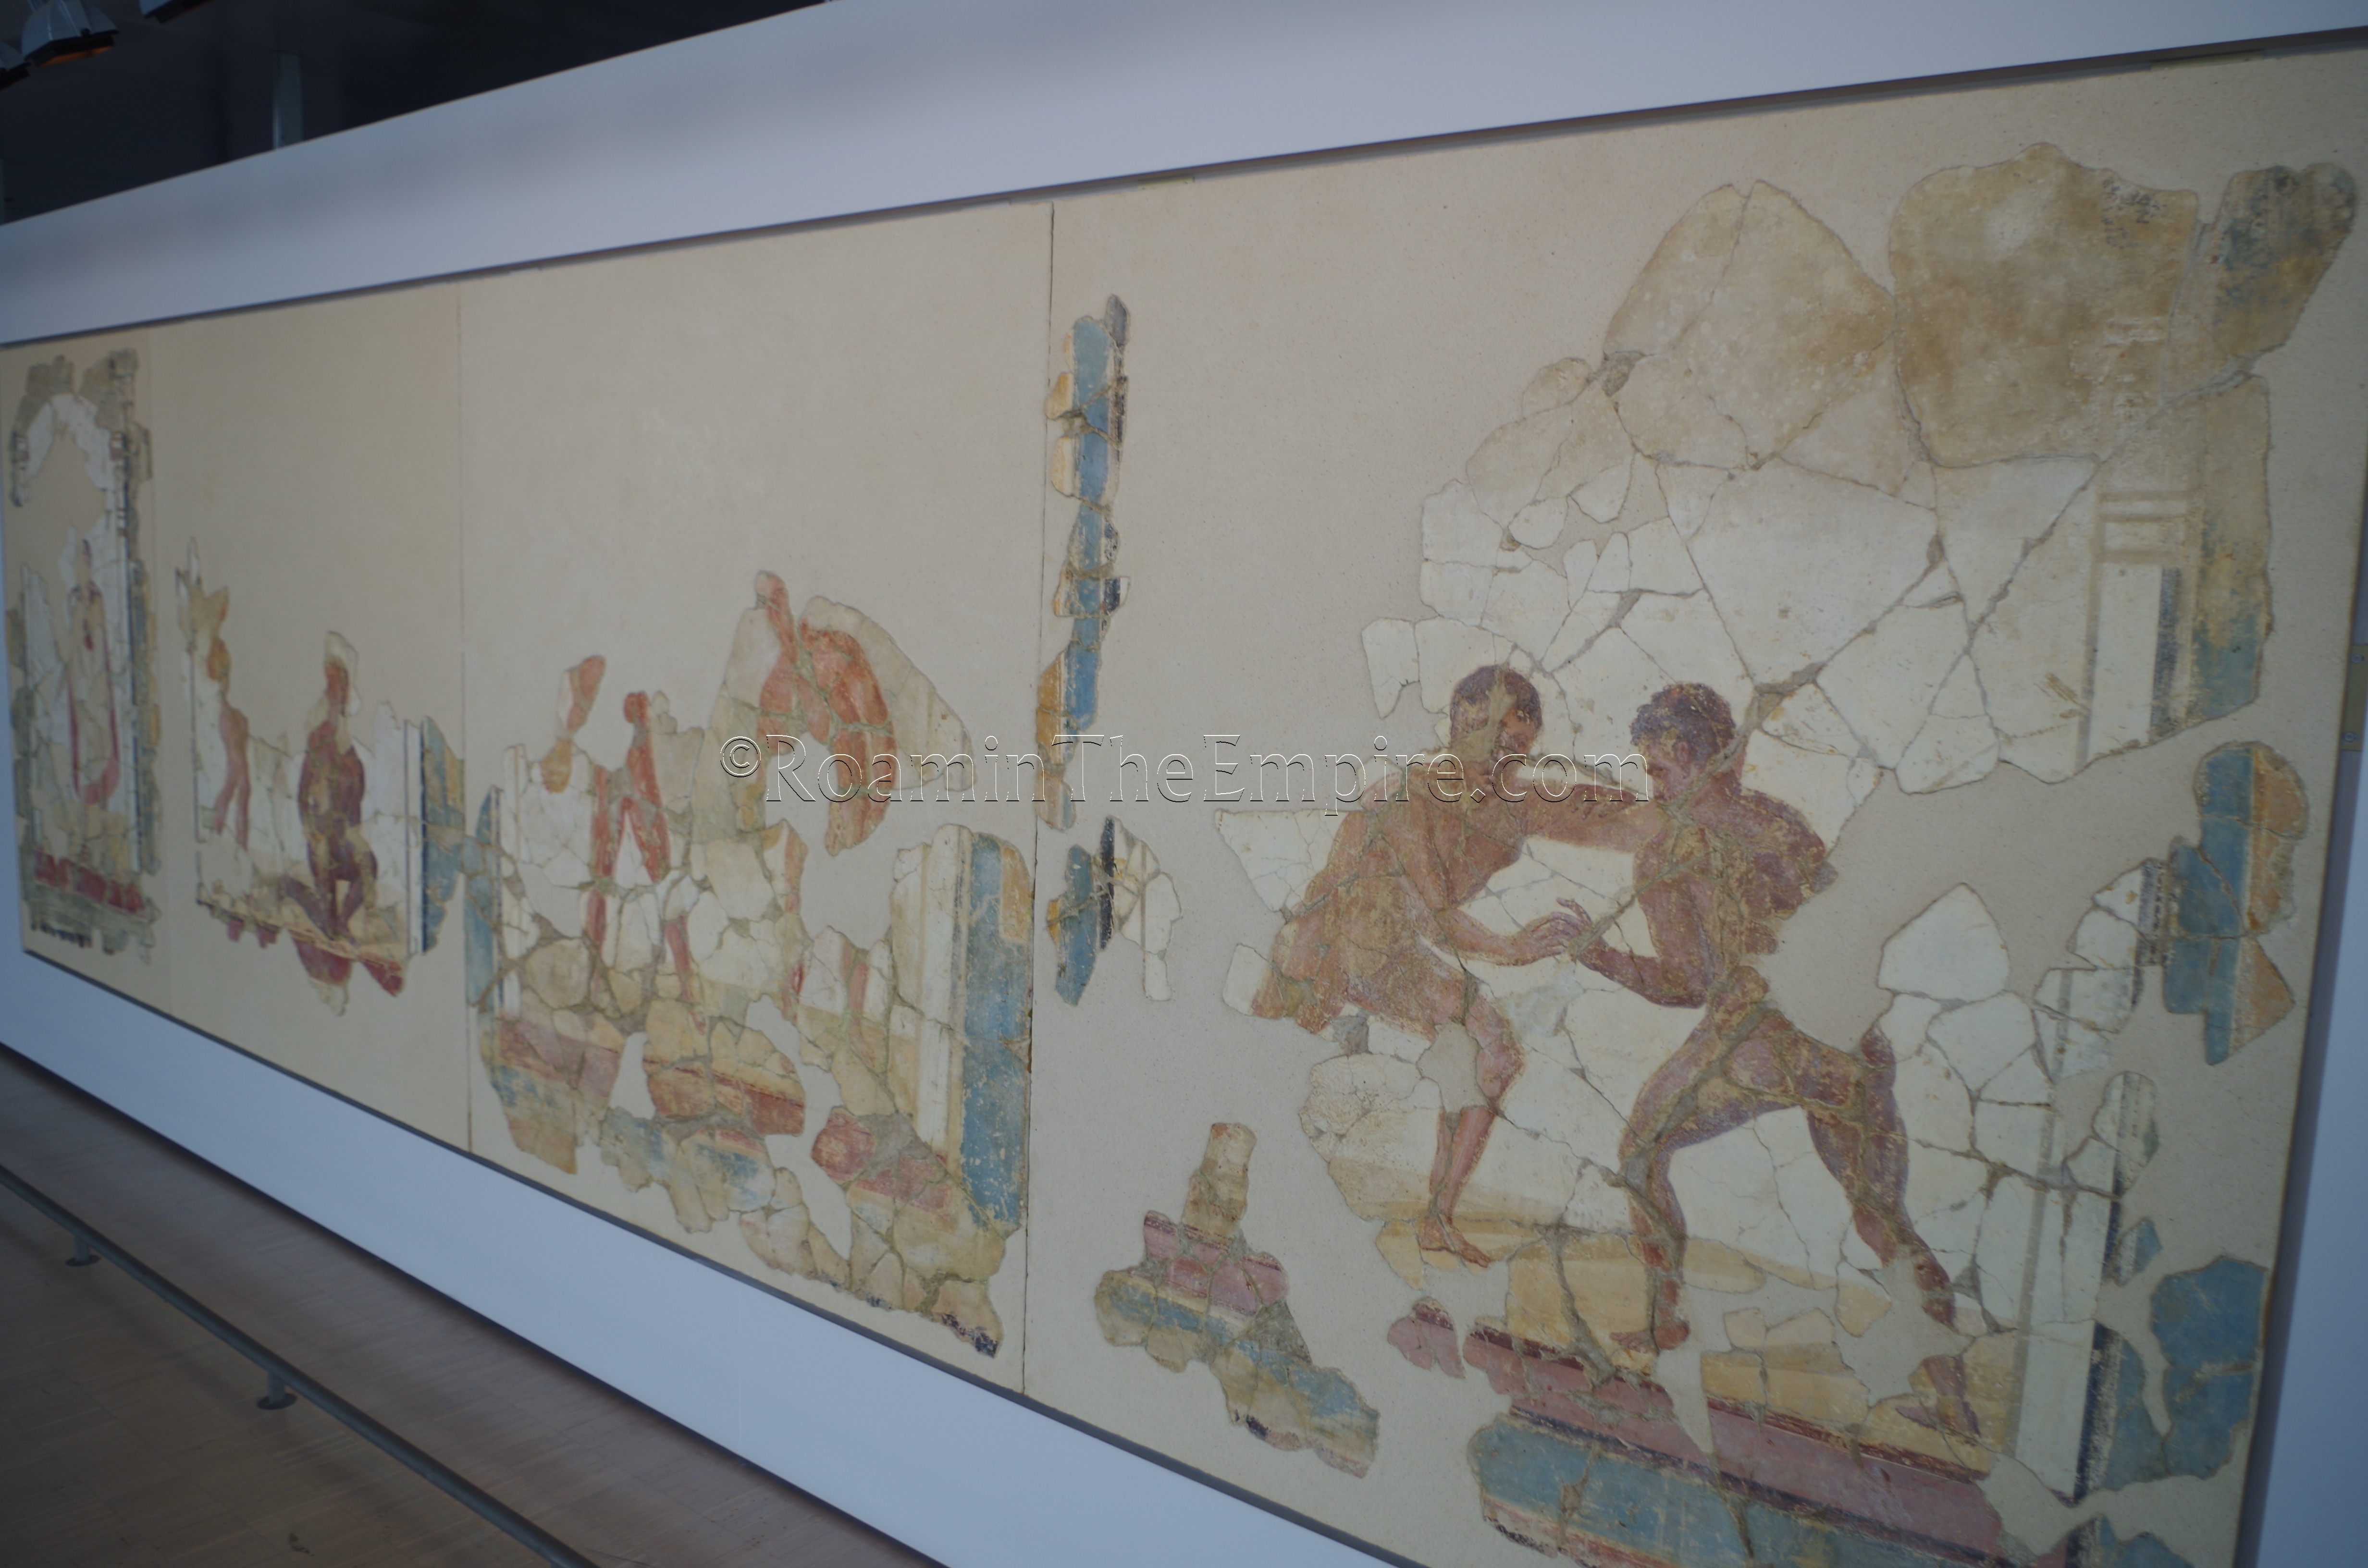 Wall paintings of athletes dated to the 2nd-3rd century CE. Found in Vienne. Vienna. Saint-Romain-en-Gal.